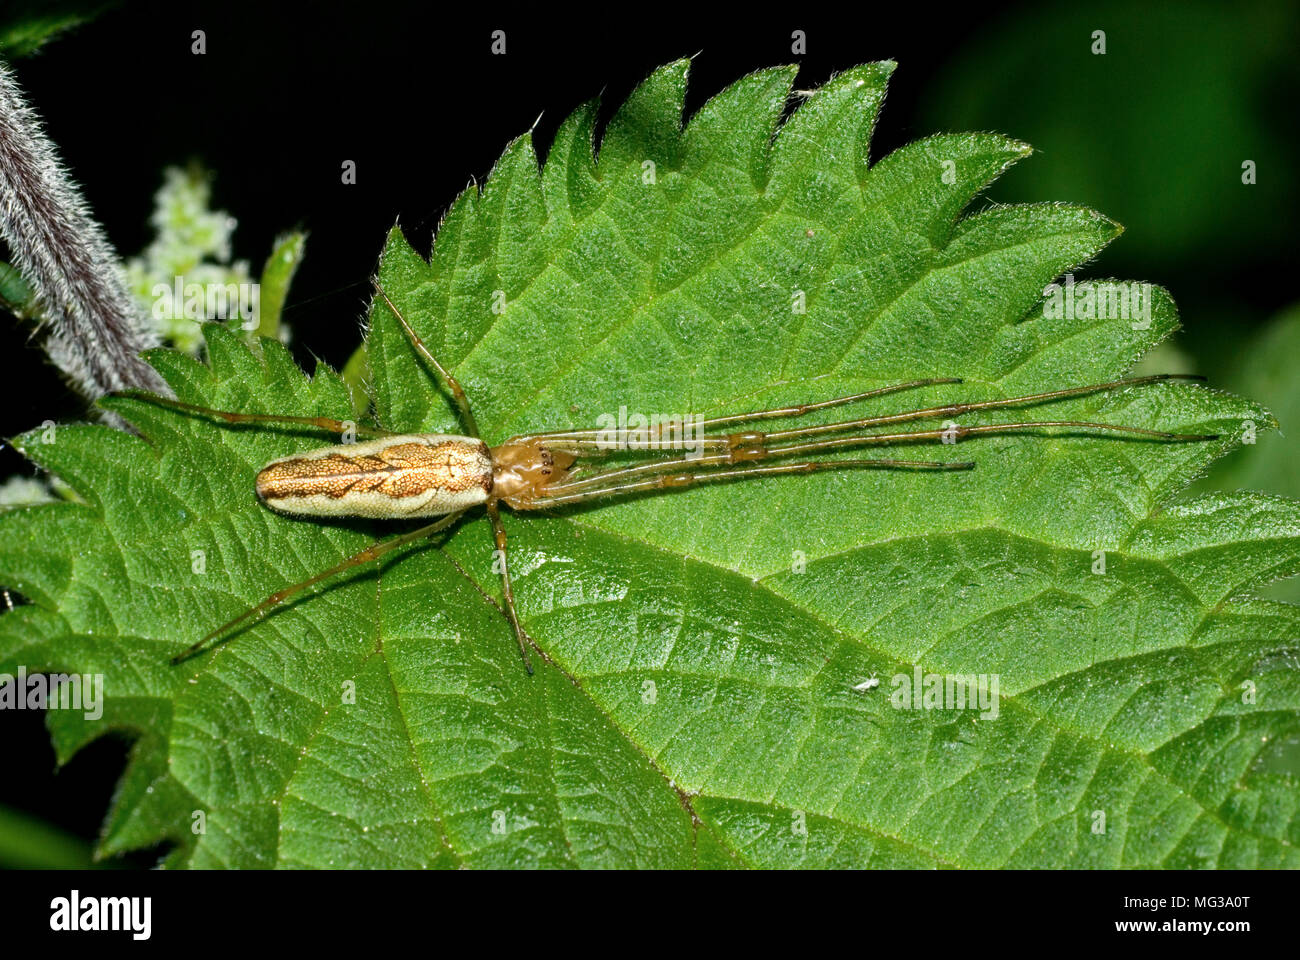 Long jawed spider Stock Photo